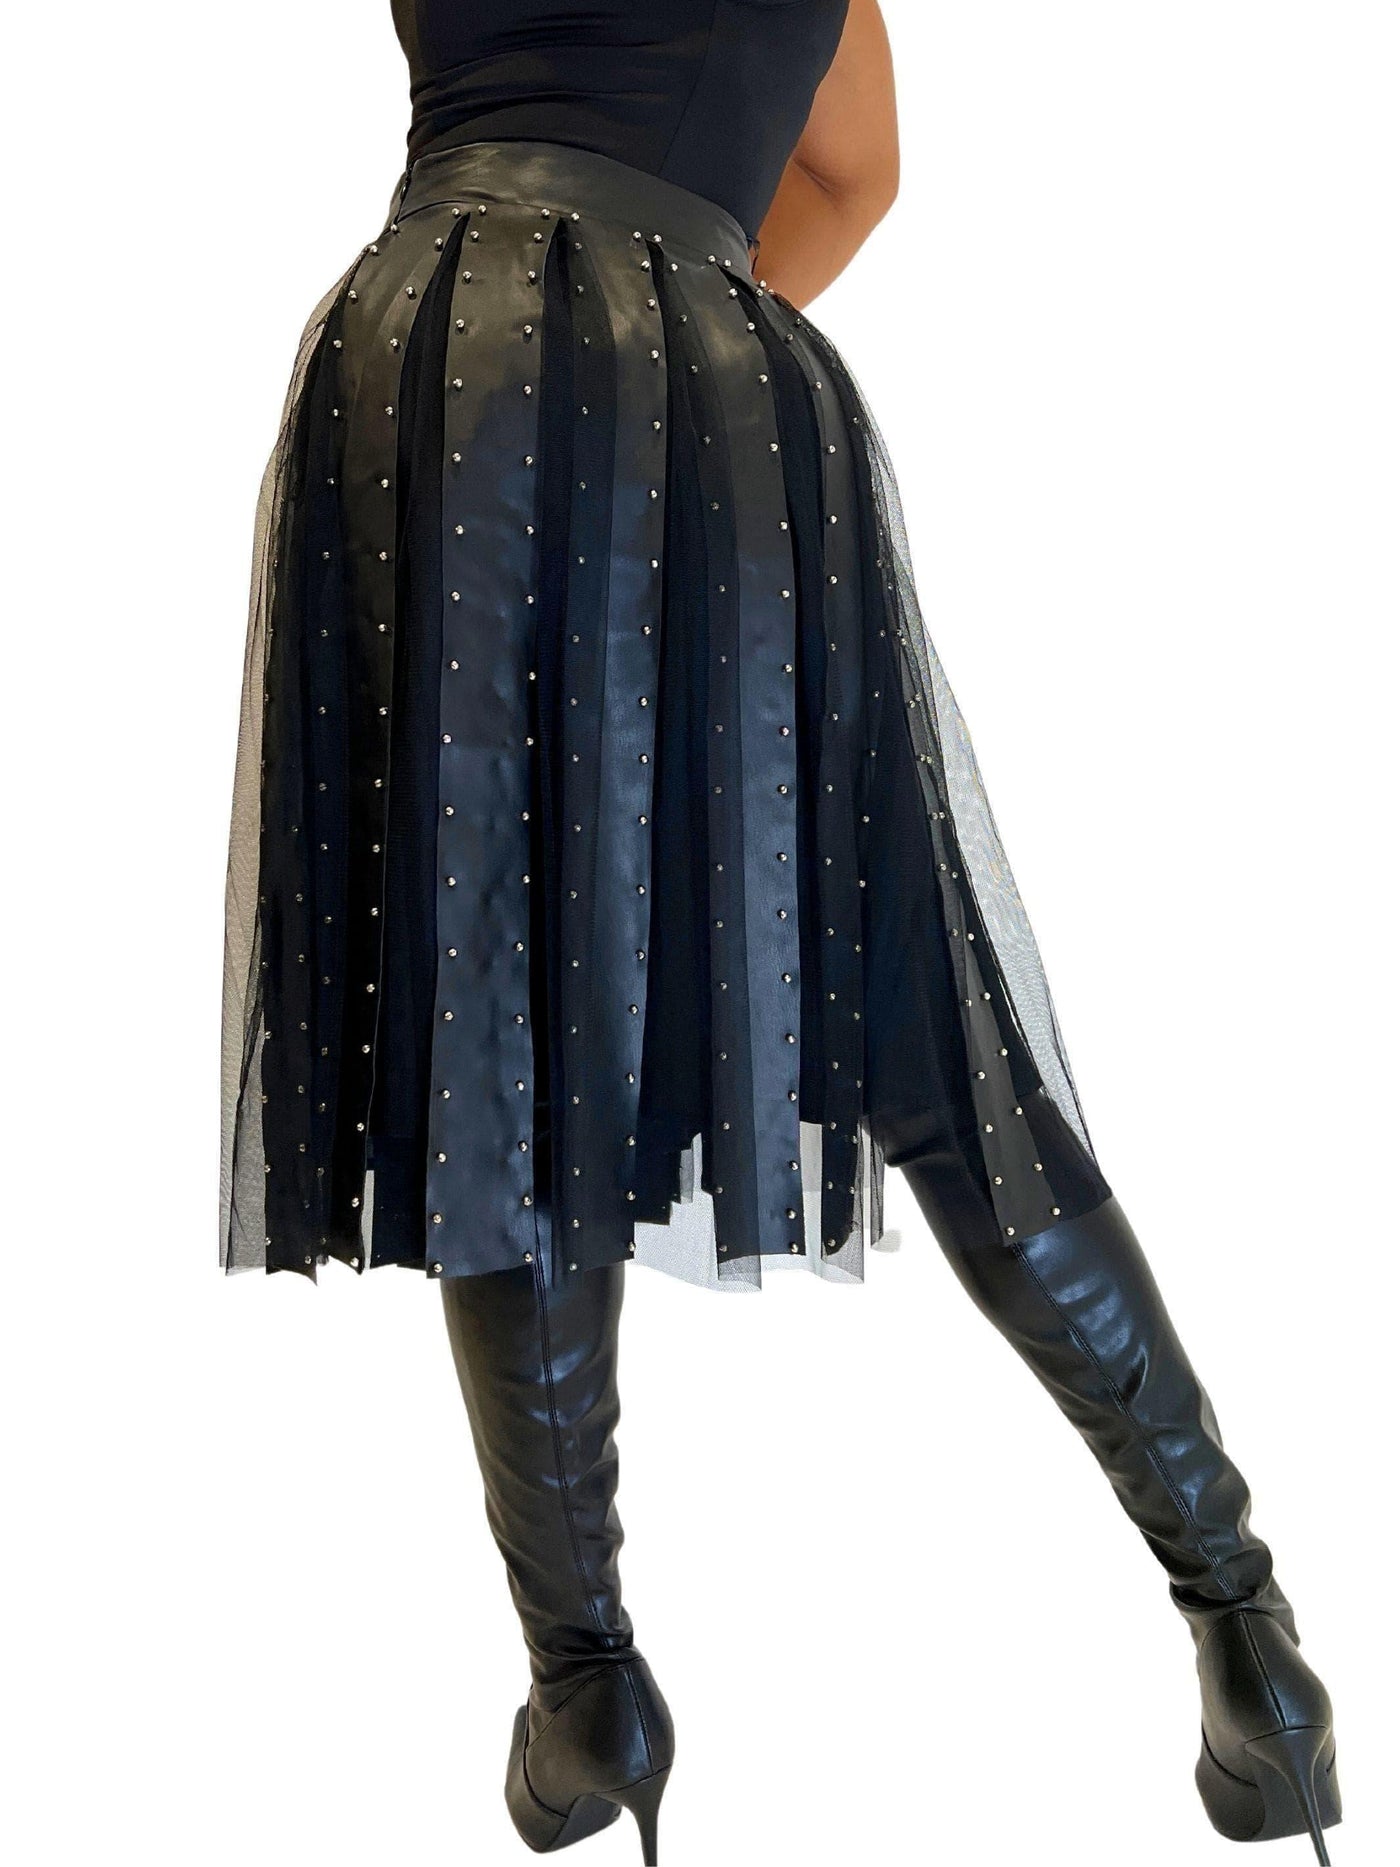 Galaxy | Mesh Skirt with Studded Leather SIZE XL - Statement Piece NY _tab_final-sale, _tab_run-that-crown-size-chart, Black, Bottom, Bottoms, Brooklyn Boutique, camel, chic, Fall, Fall Fashion, final sale, High Waisted, leather, Maxi Skirt, Misses, not clearance, Ships from USA, SPNY Exclusive, Standard Fall, statement, Statement Clothing, statement piece, Statement Piece Boutique, statement piece ny, Statement Pieces, Statement Pieces Boutique, Women's Boutique, Workwear, X-Large, XL Skirts